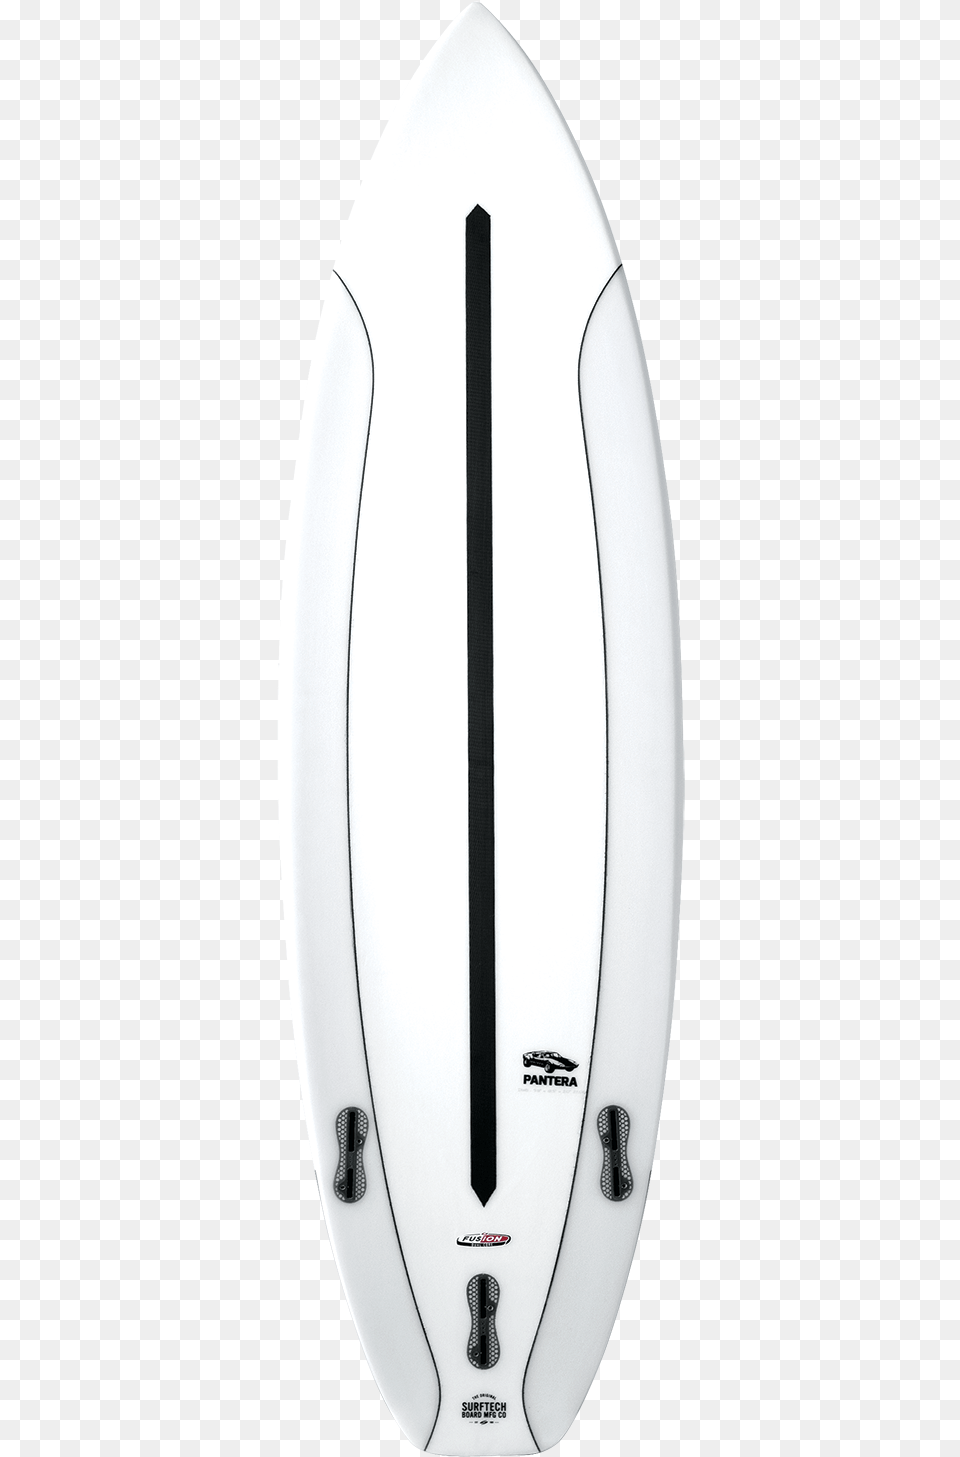 The Pantera Features A Unique Low Forward Rocker Neutral Vase, Sea, Water, Surfing, Leisure Activities Png Image